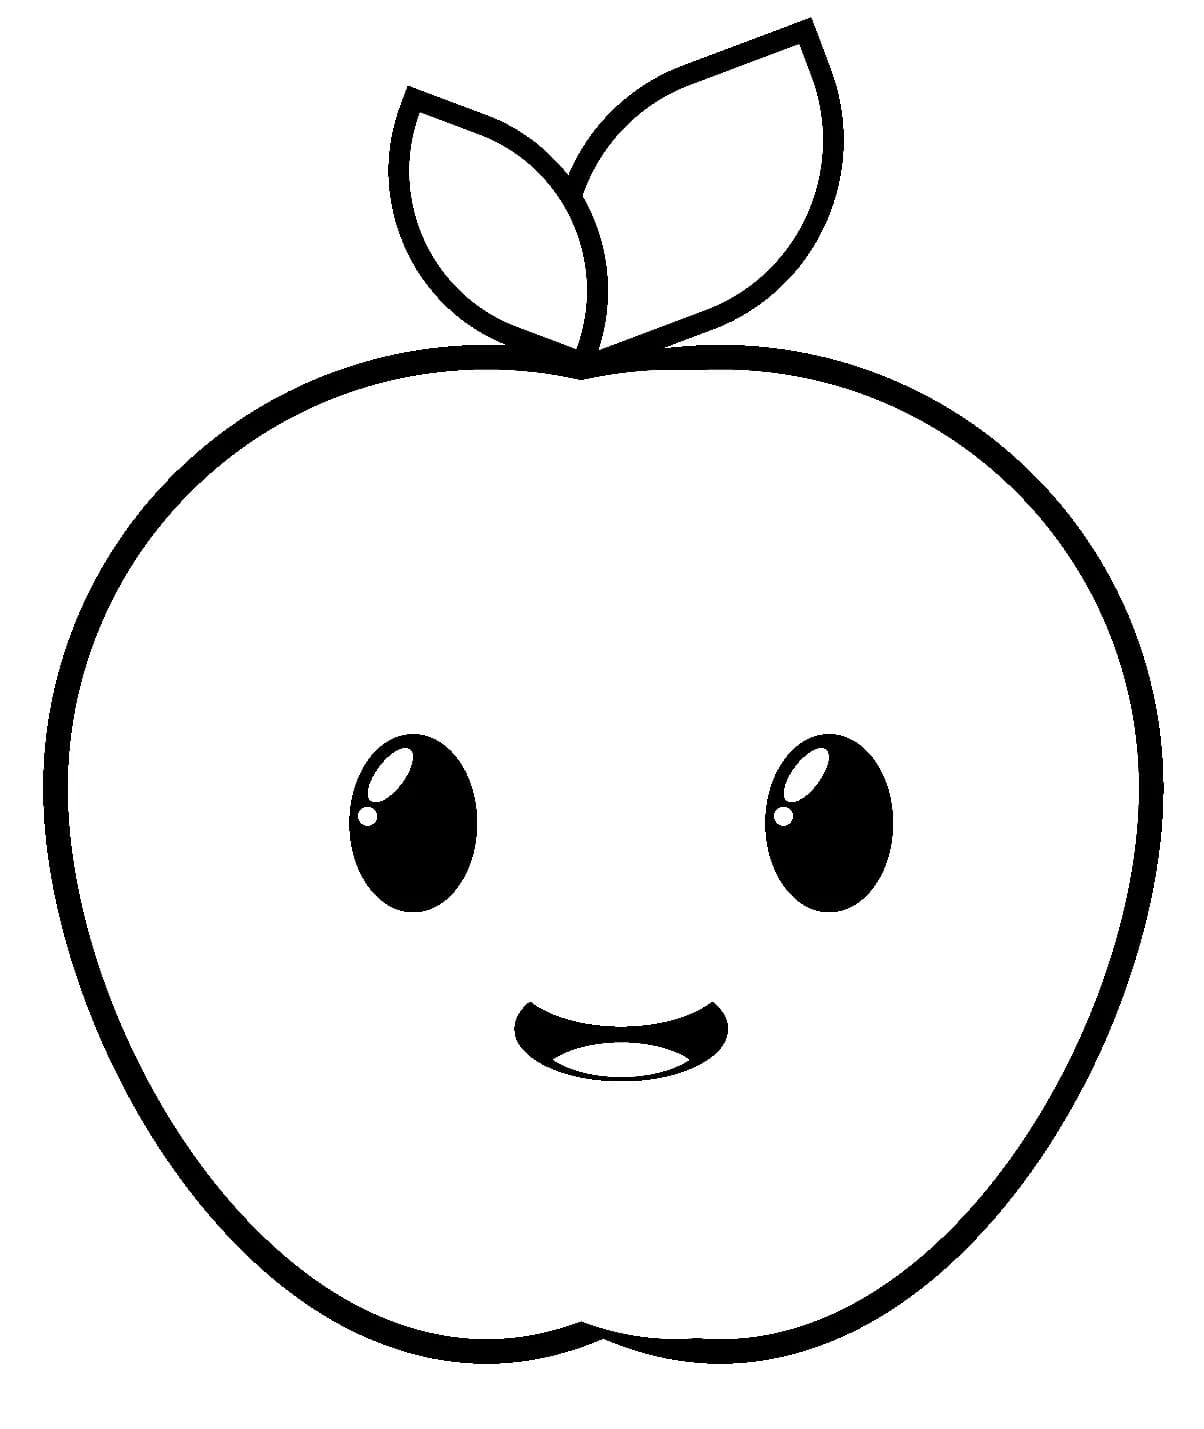 Printable Cute Apple coloring page - Download, Print or Color Online ...